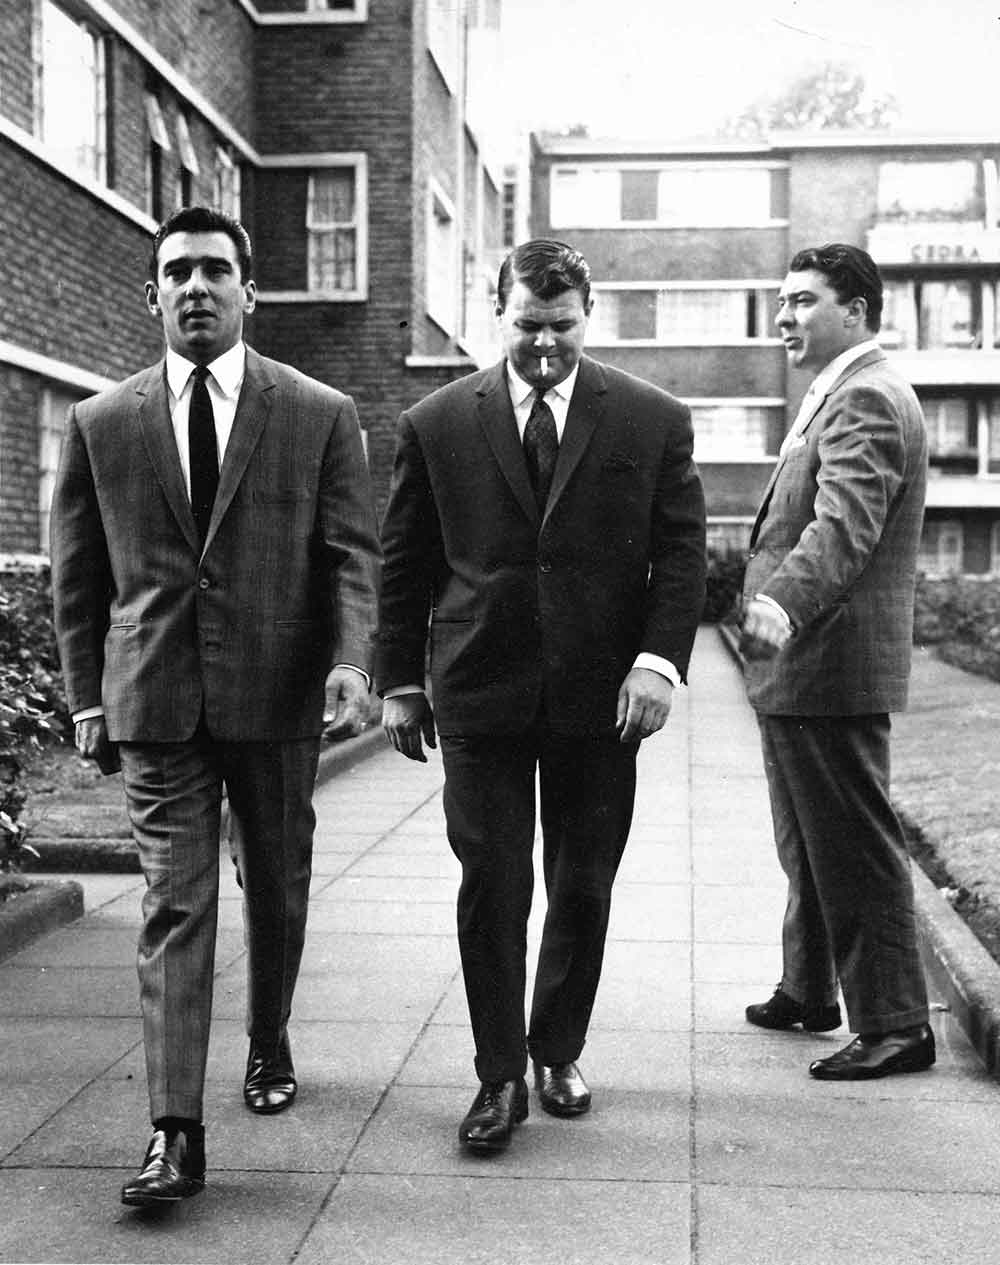 Kray Twins with Squibb walking outside flats in East London